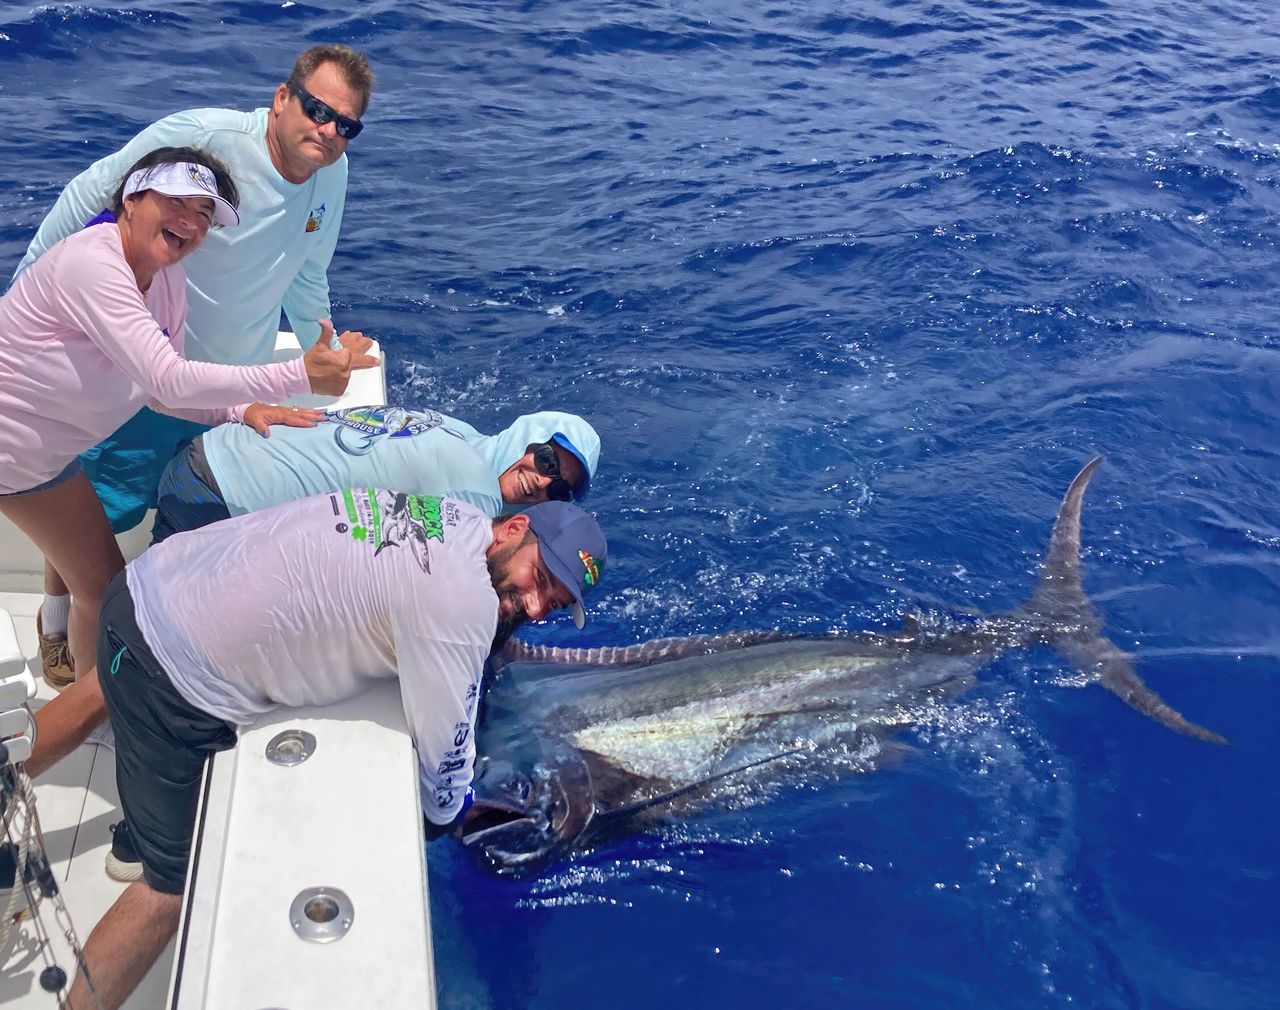 Nicholas Cioffi (front) of West Palm Beach, Fla. released a blue marlin estimated at 400 pounds during the annual 2023 Key West Marlin Tournament. His team took second place. Photo: Capt. Billy Wickers III